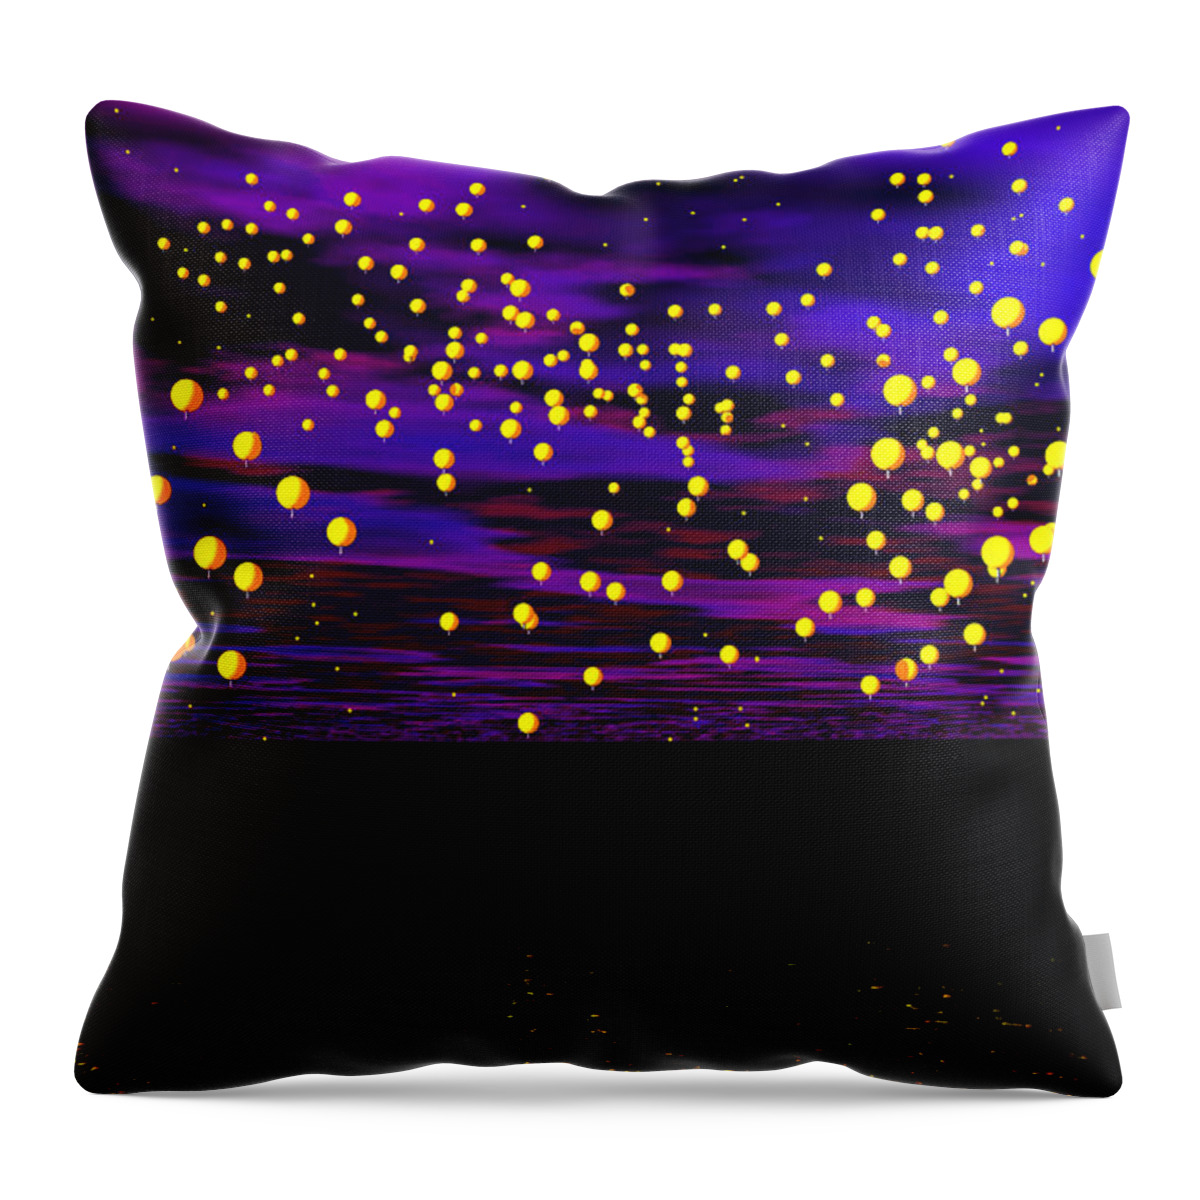 Lanterns Throw Pillow featuring the photograph Magic Lanterns by Mark Blauhoefer